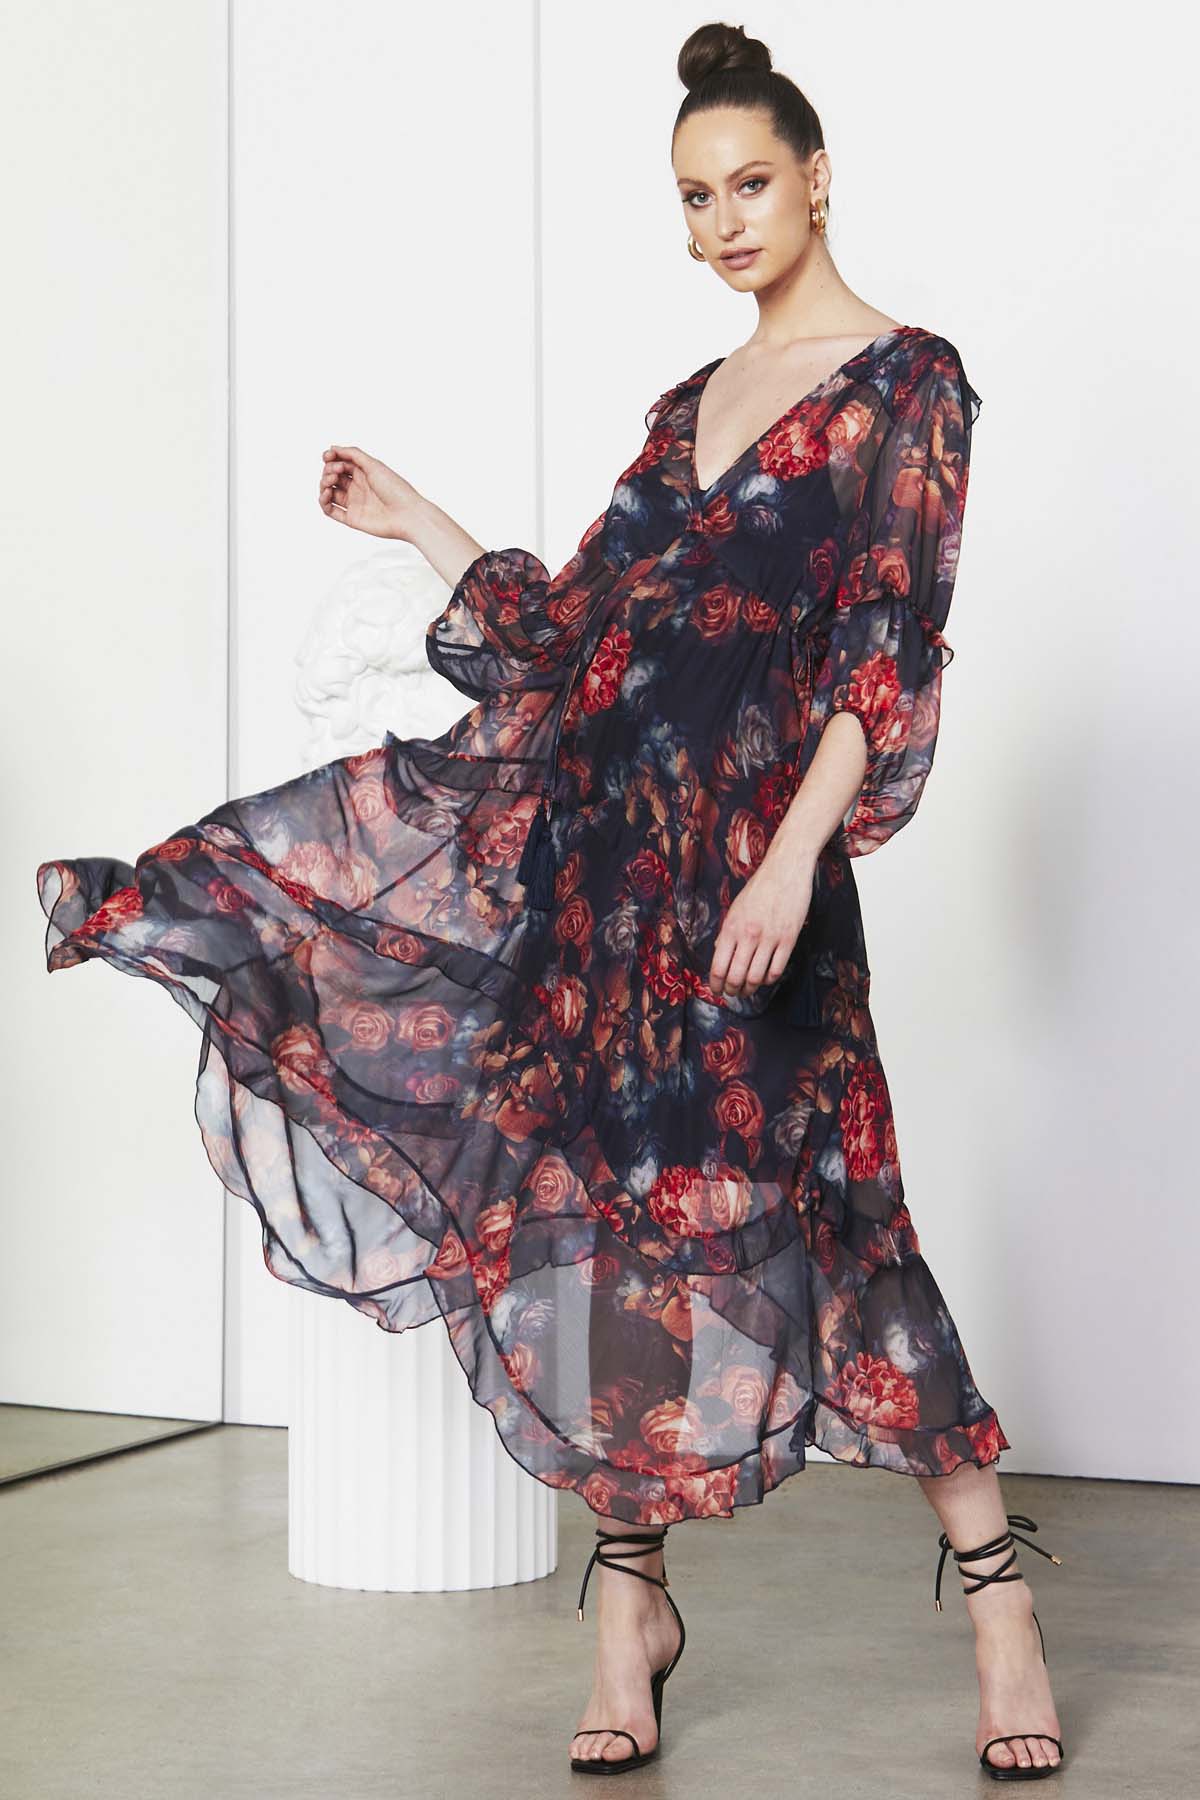 Fate + Becker No Love Today Midi Dress in Moody Floral - Hey Sara